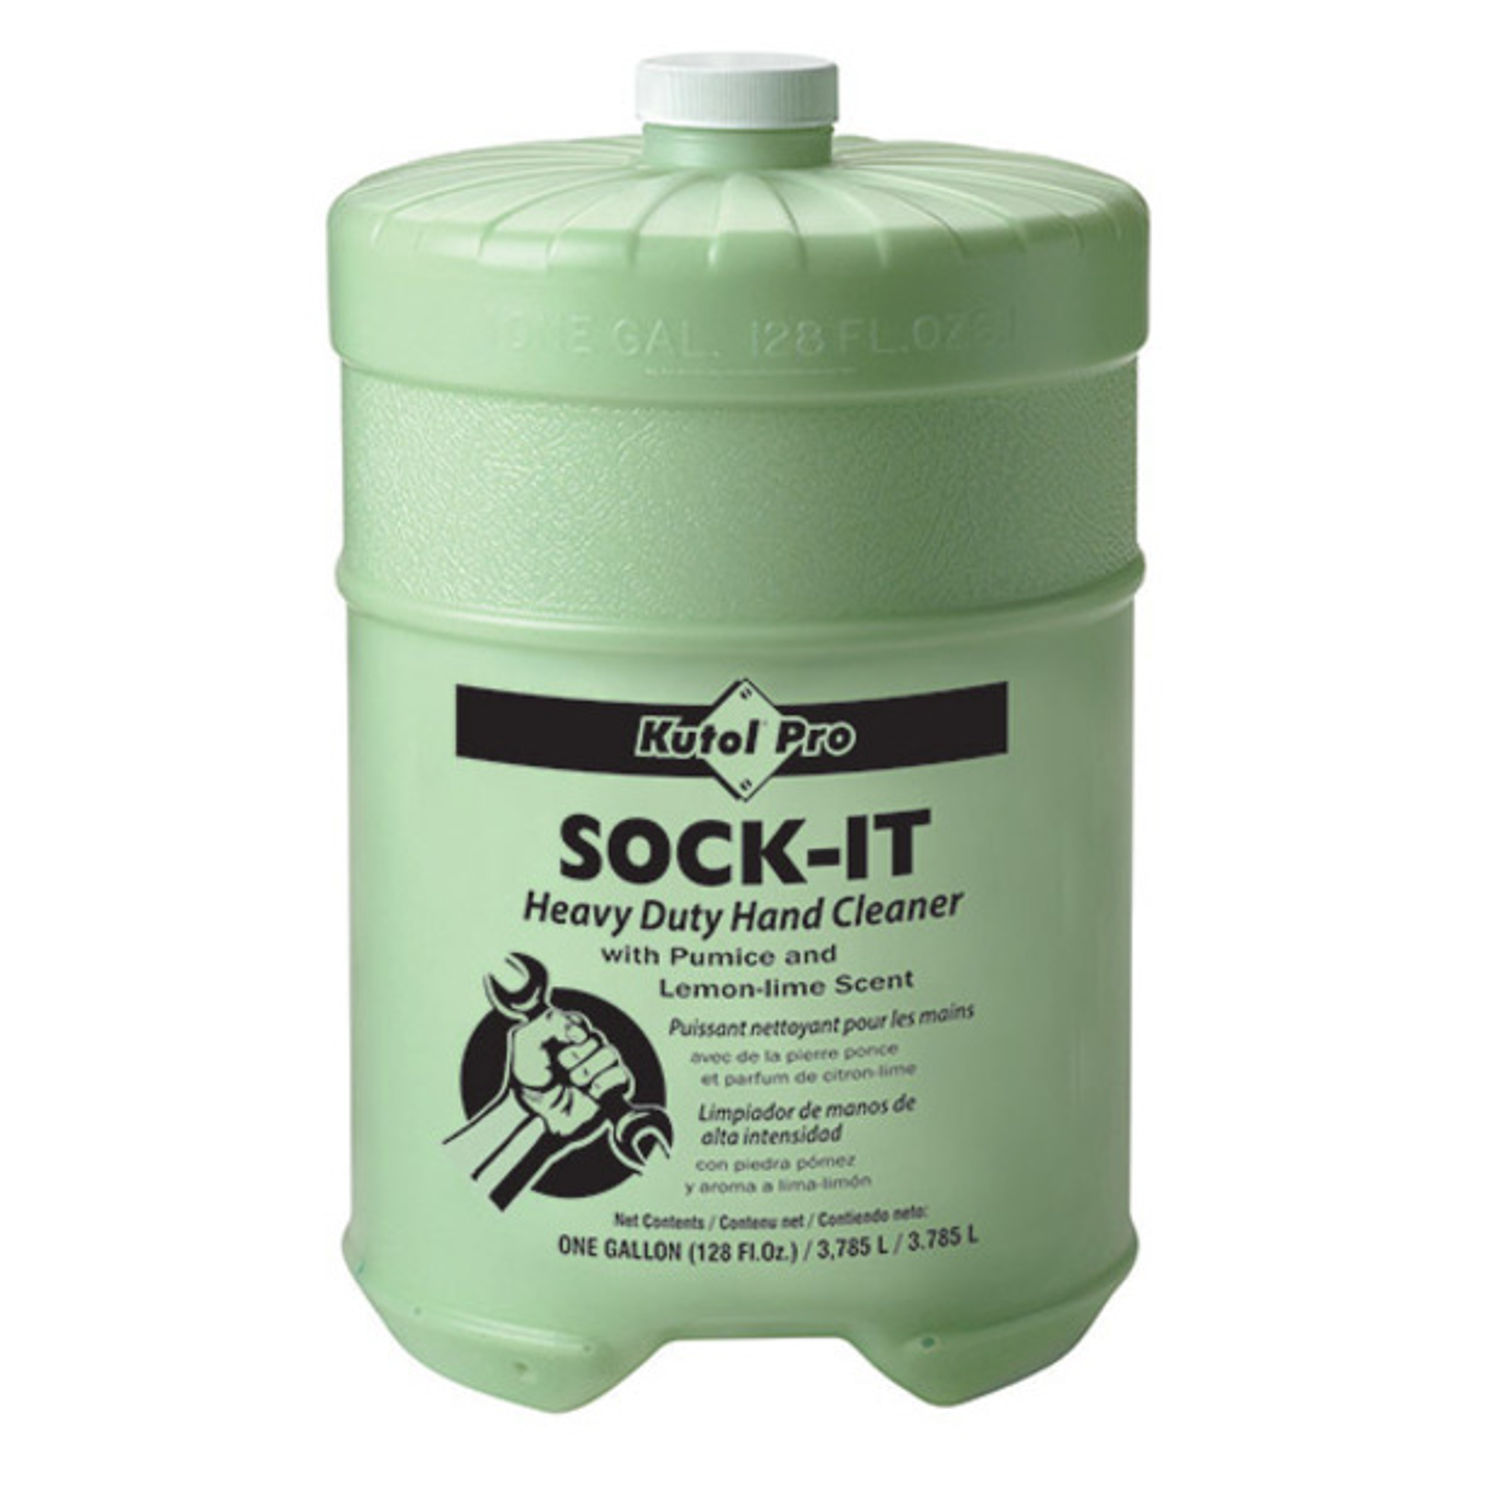 Sock-It with Pumice Lemon Lime Scent, 1 gal (3.8 L), Flat Top Gallon Dispenser, Soil Remover, Oil Remover, Varnish Remover, Hand, Green, Heavy Duty, Non-drying, Quick Rinse, 4 / Pack